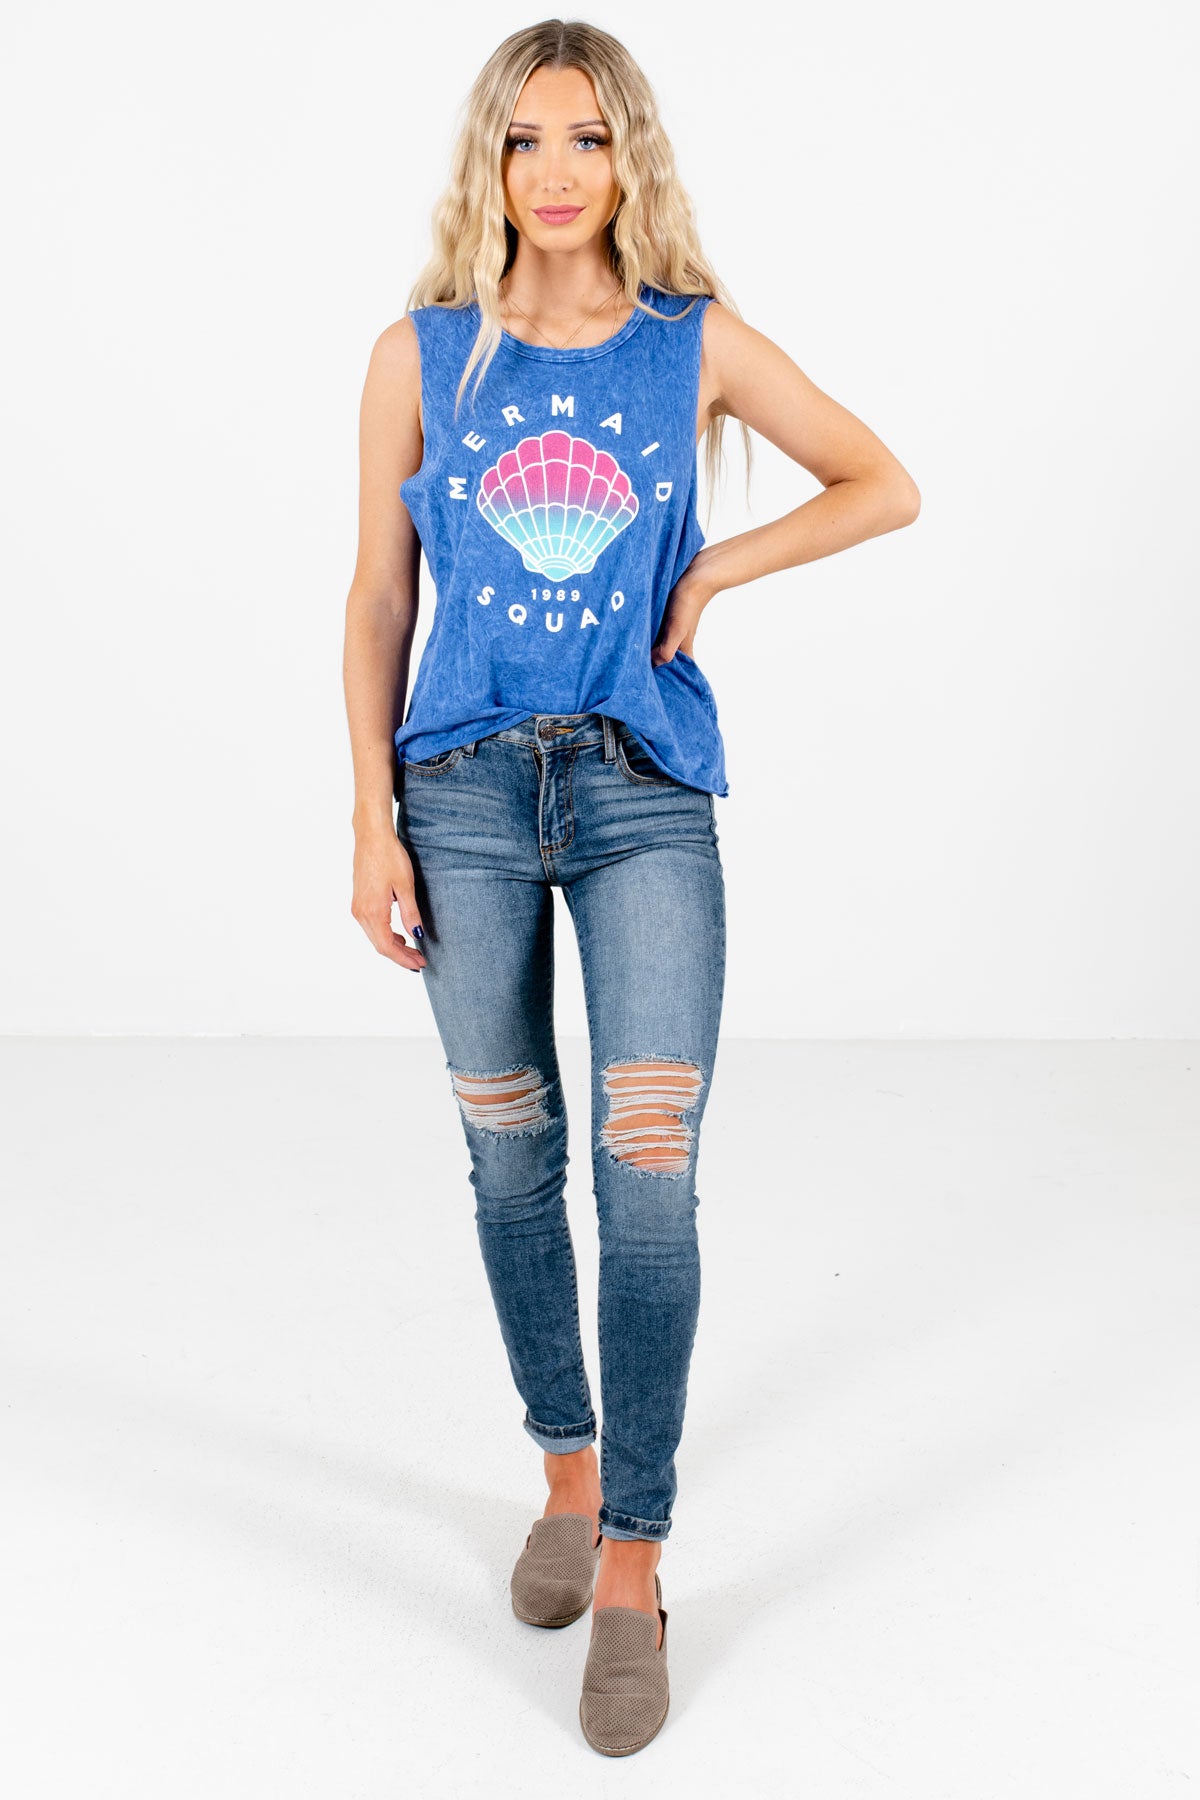 Blue Cute and Comfortable Boutique Tank Tops for Women